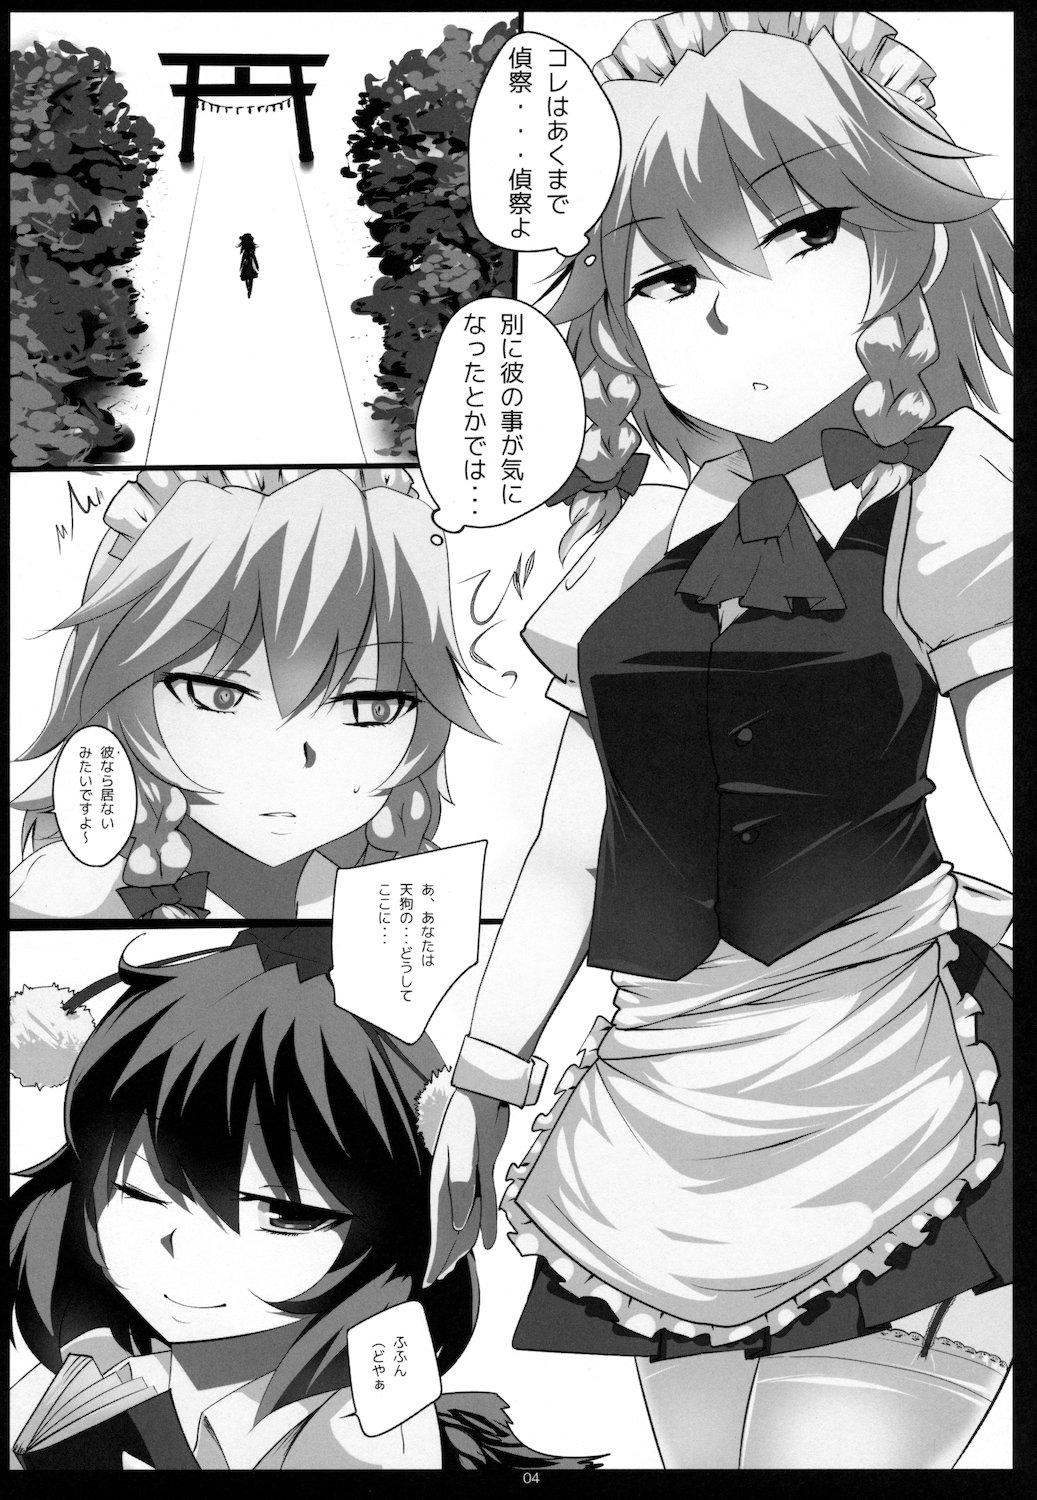 Free Petite Porn Touhou Dere Bitch 7 - Touhou project Pounded - Page 4